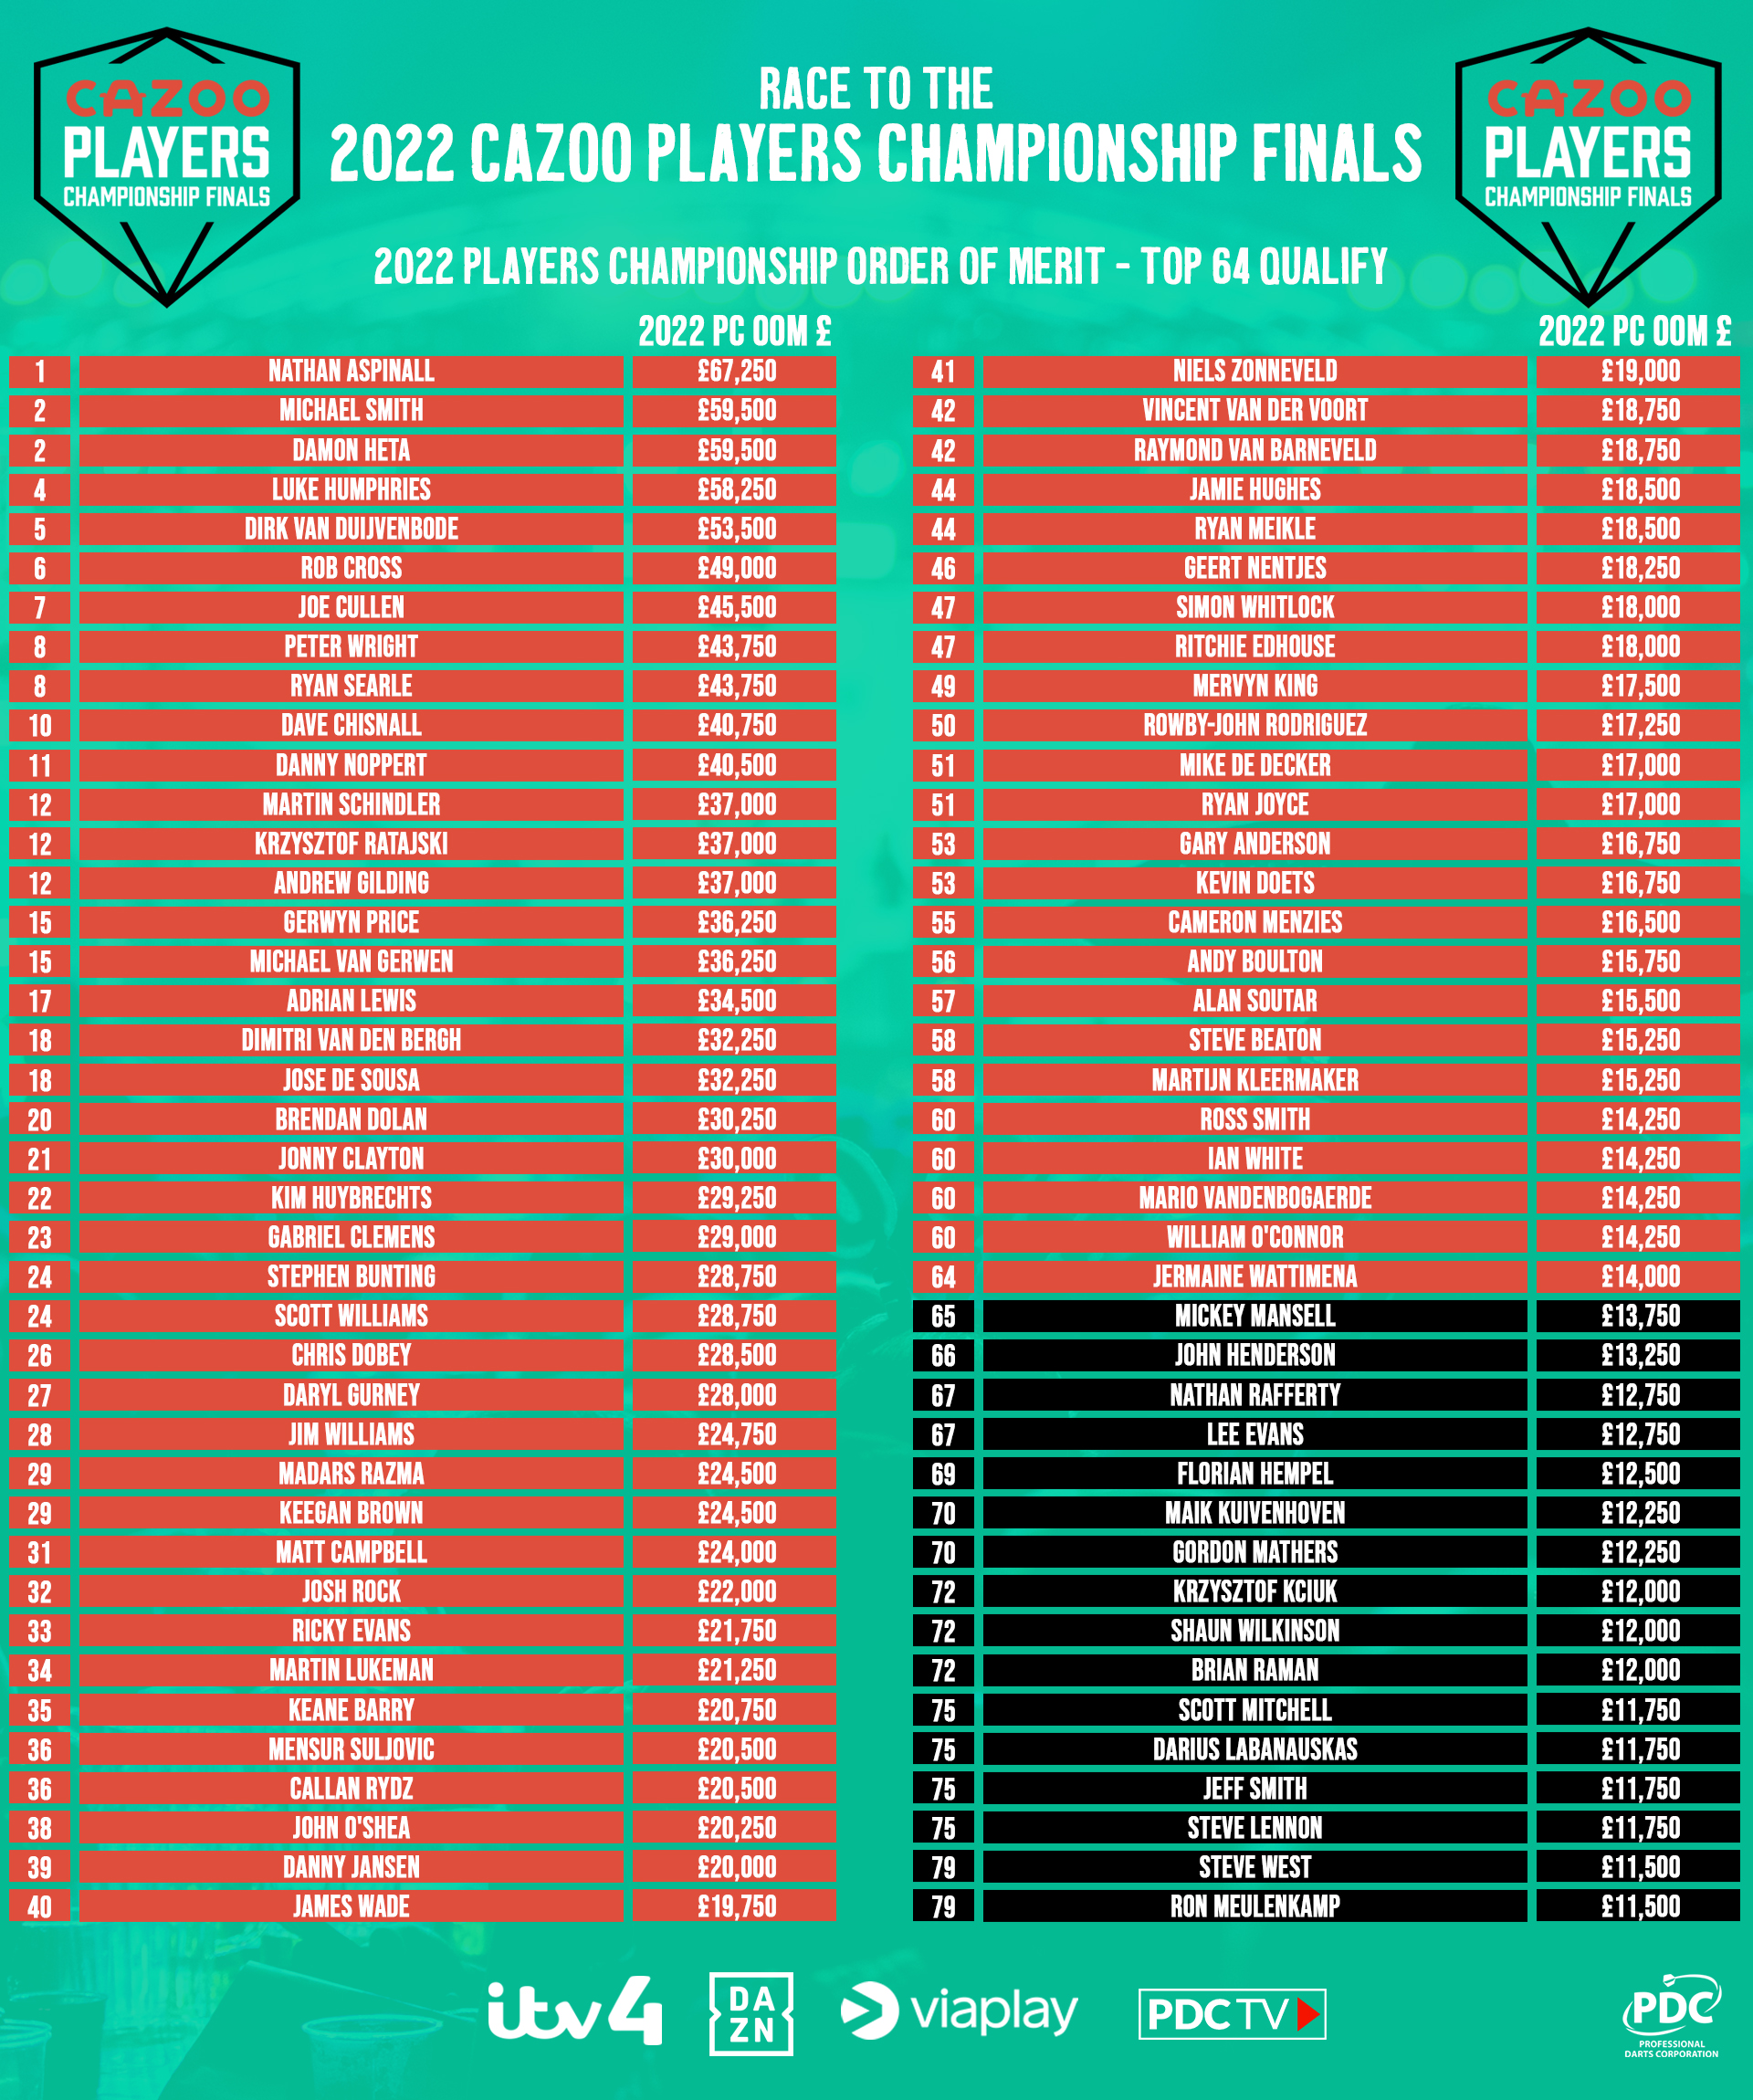 Players Championship Finals - Order of Merit race